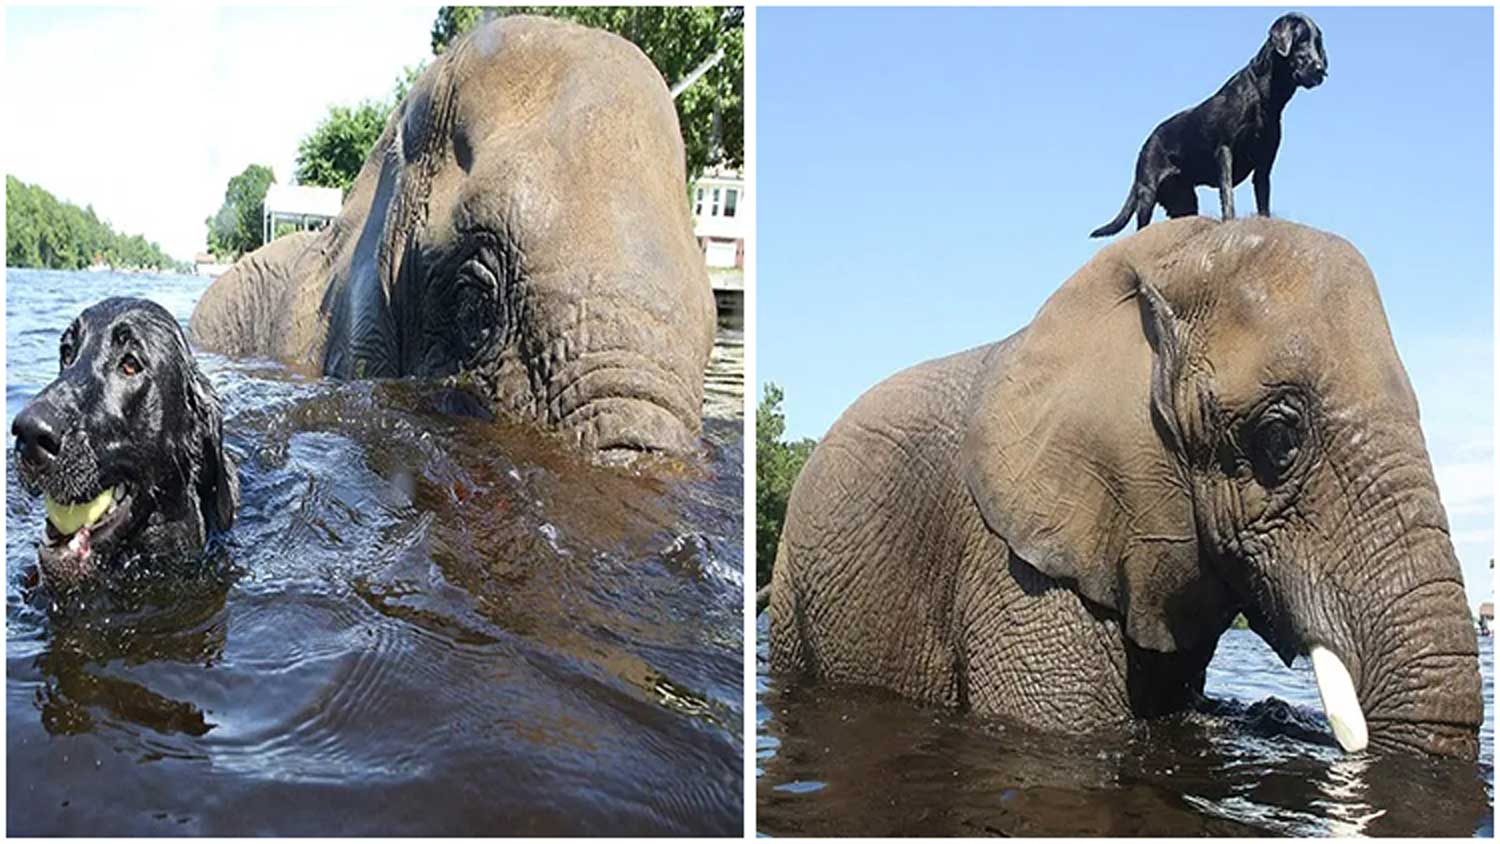 Orphaned Elephant Learned to Play Fetch from Its Labrador Friend Who Befriended It